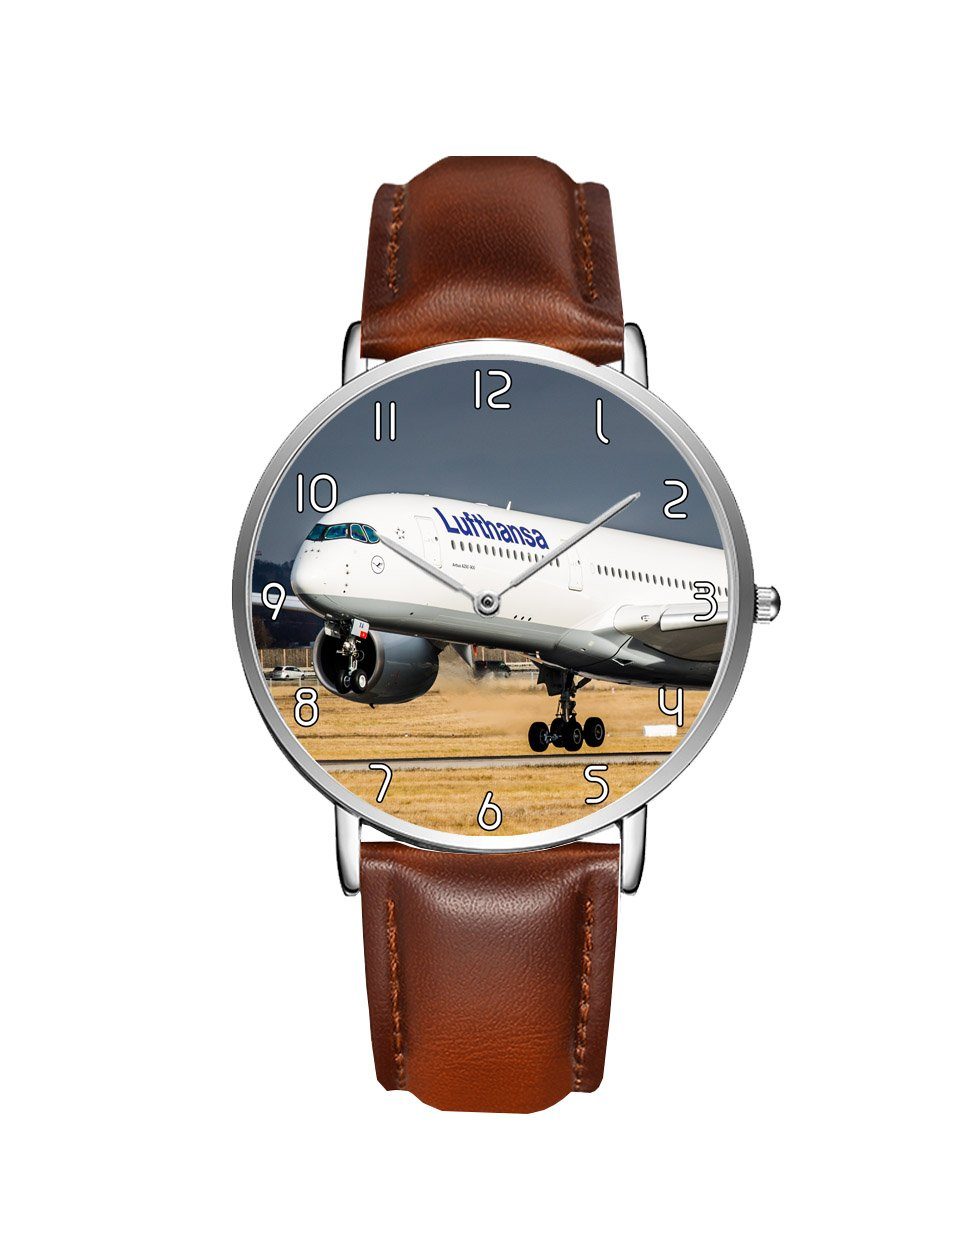 Lutfhansa A350 Printed Leather Strap Watches Aviation Shop Silver & Brown Leather Strap 